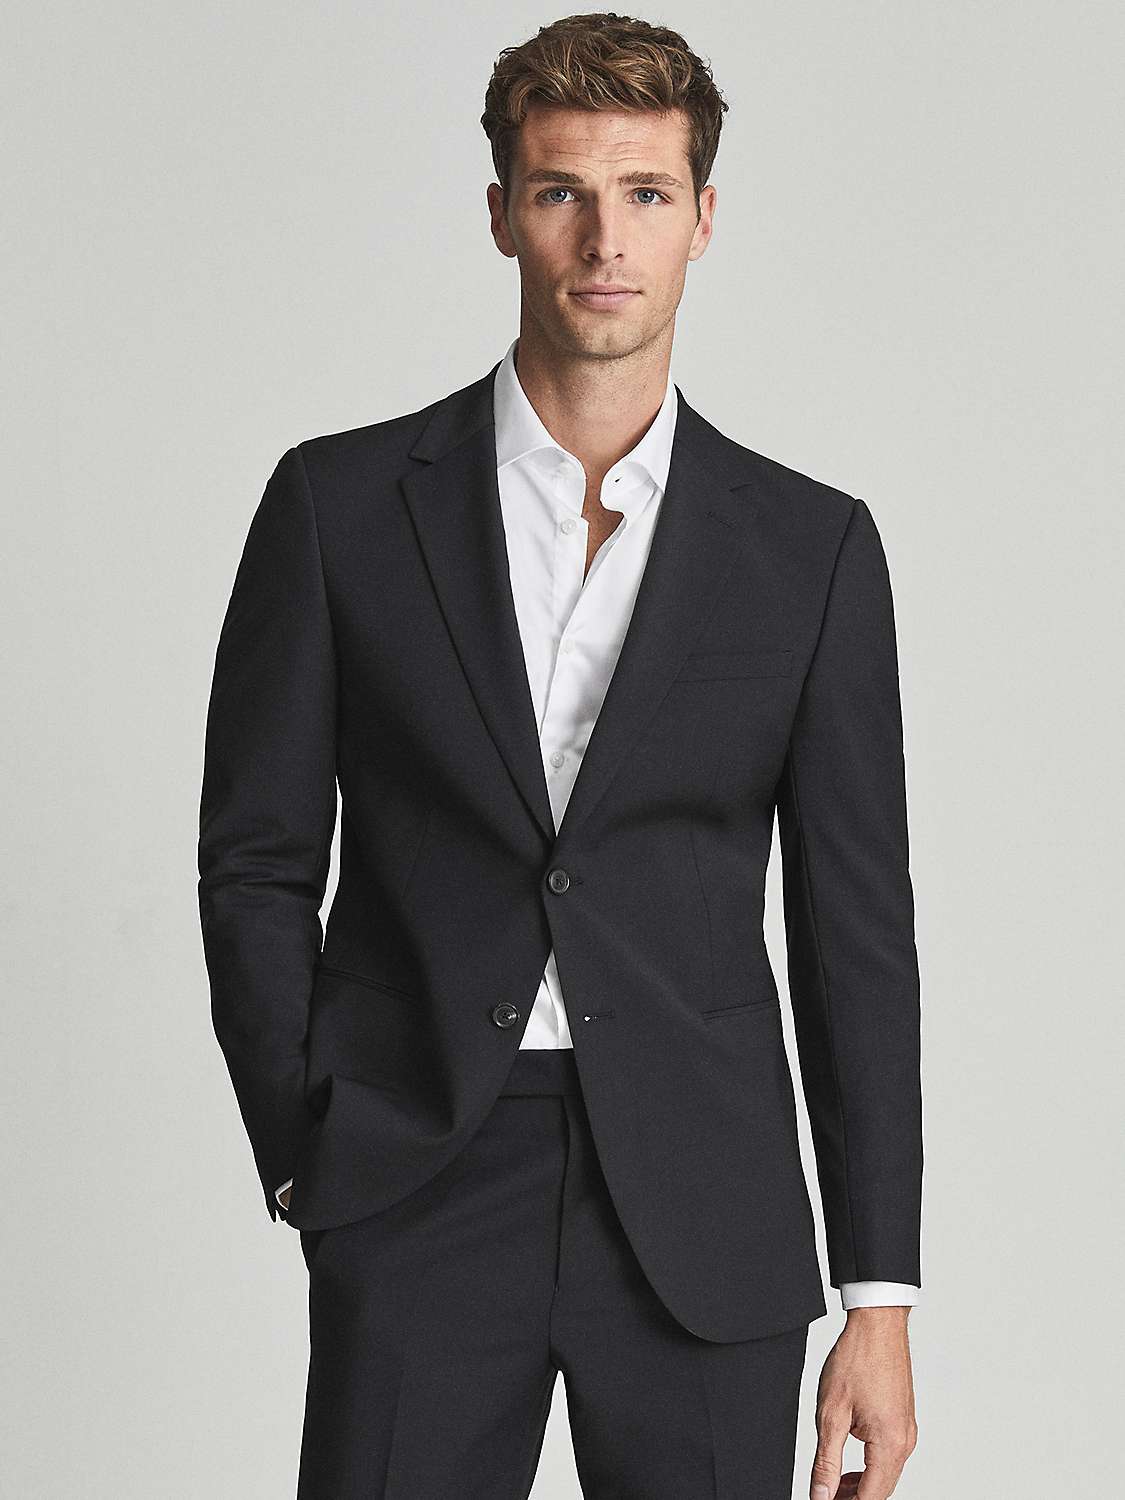 Buy Reiss Remote Shirt, White Online at johnlewis.com